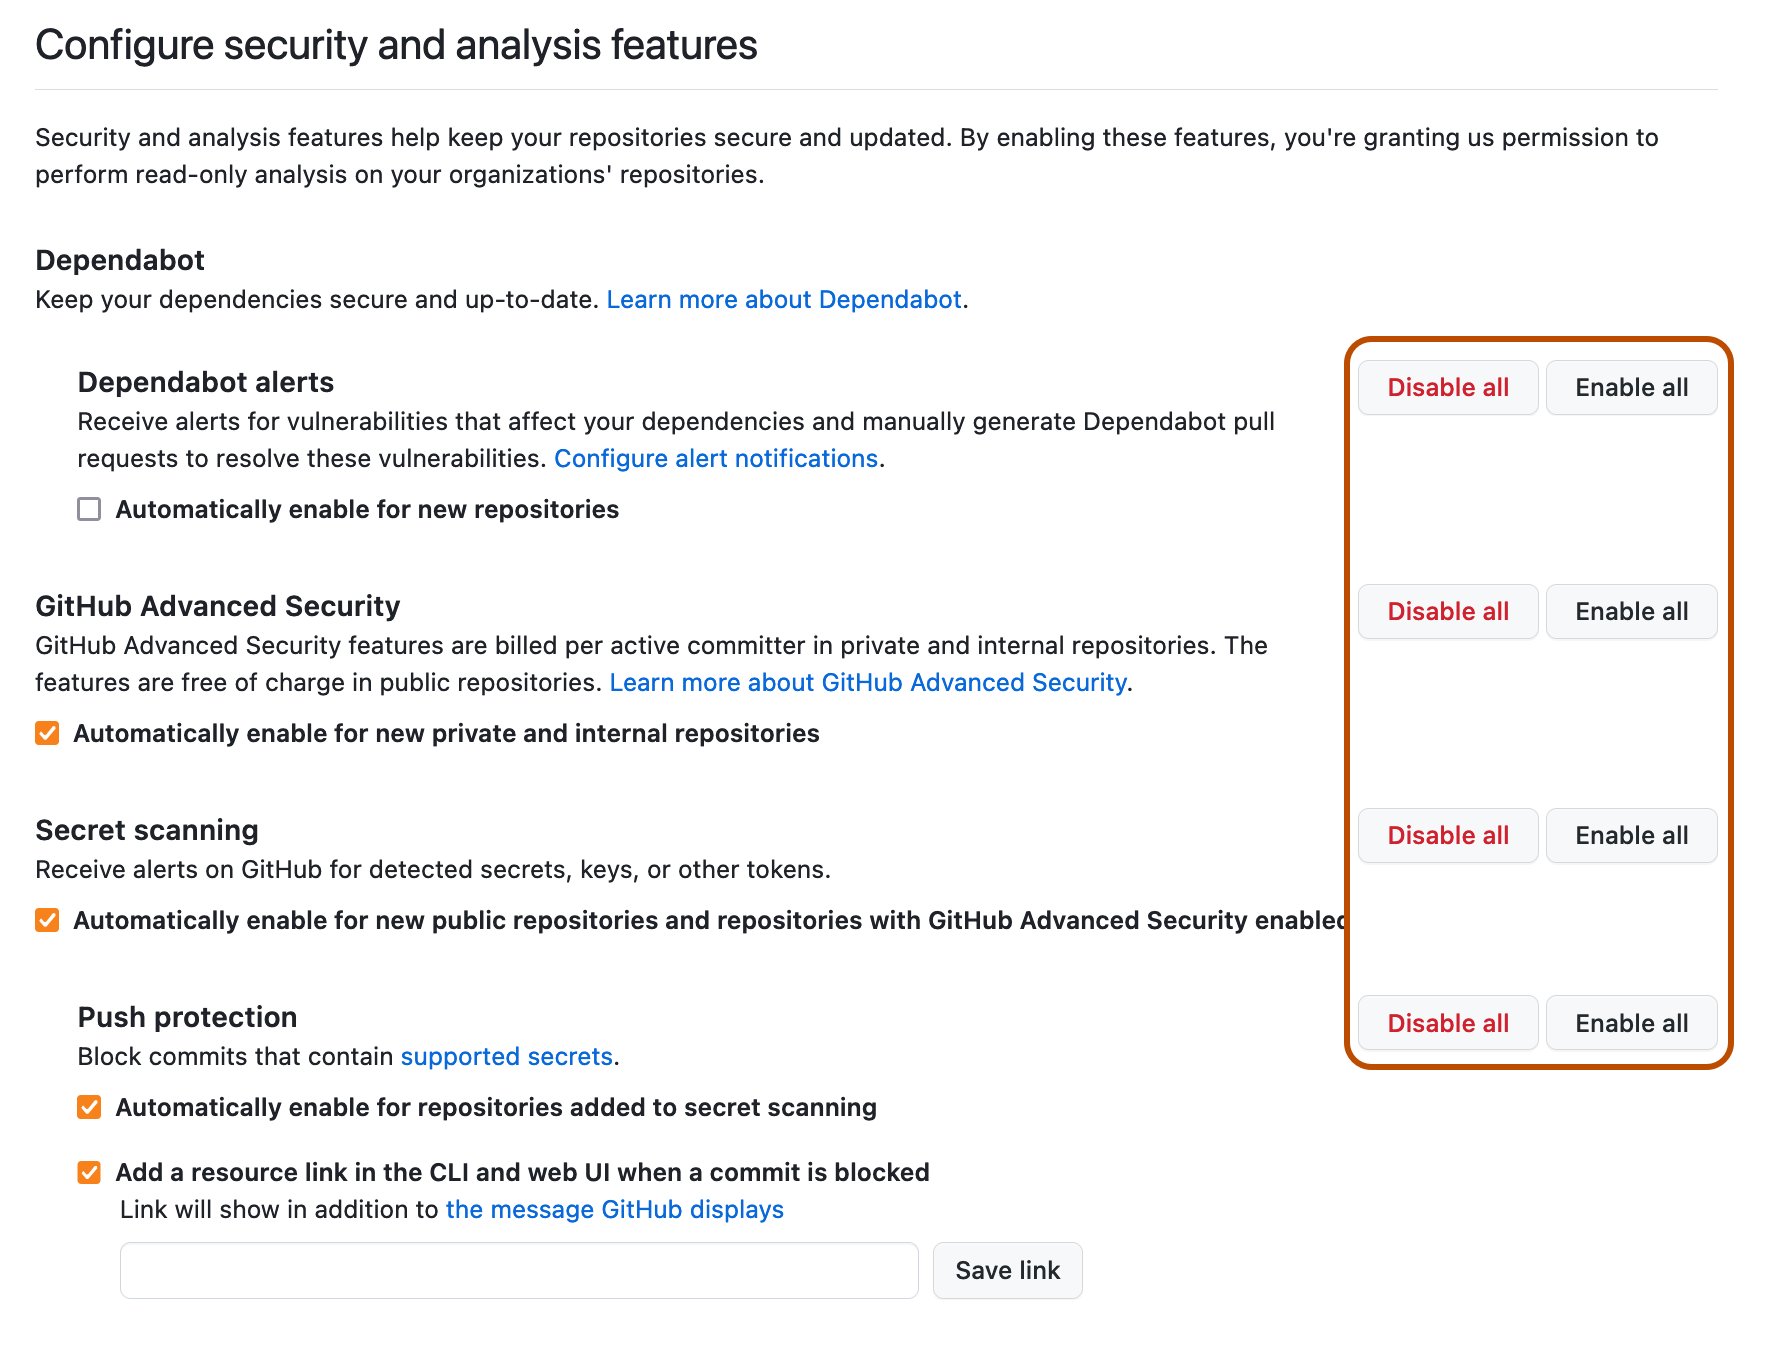 Screenshot of "Enable all" or "Disable all" buttons for "Configure security and analysis" features